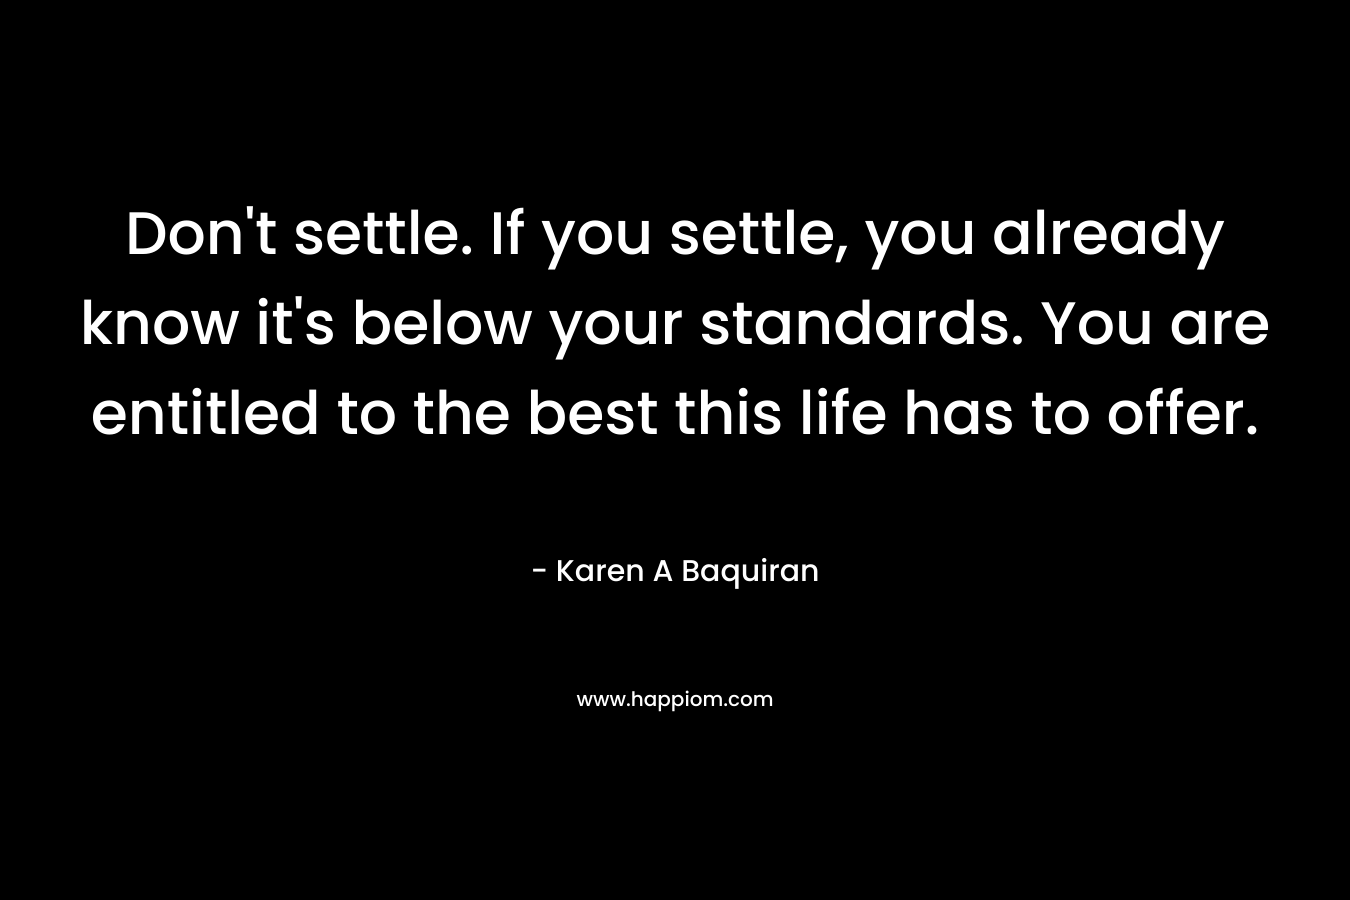 Don't settle. If you settle, you already know it's below your standards. You are entitled to the best this life has to offer.